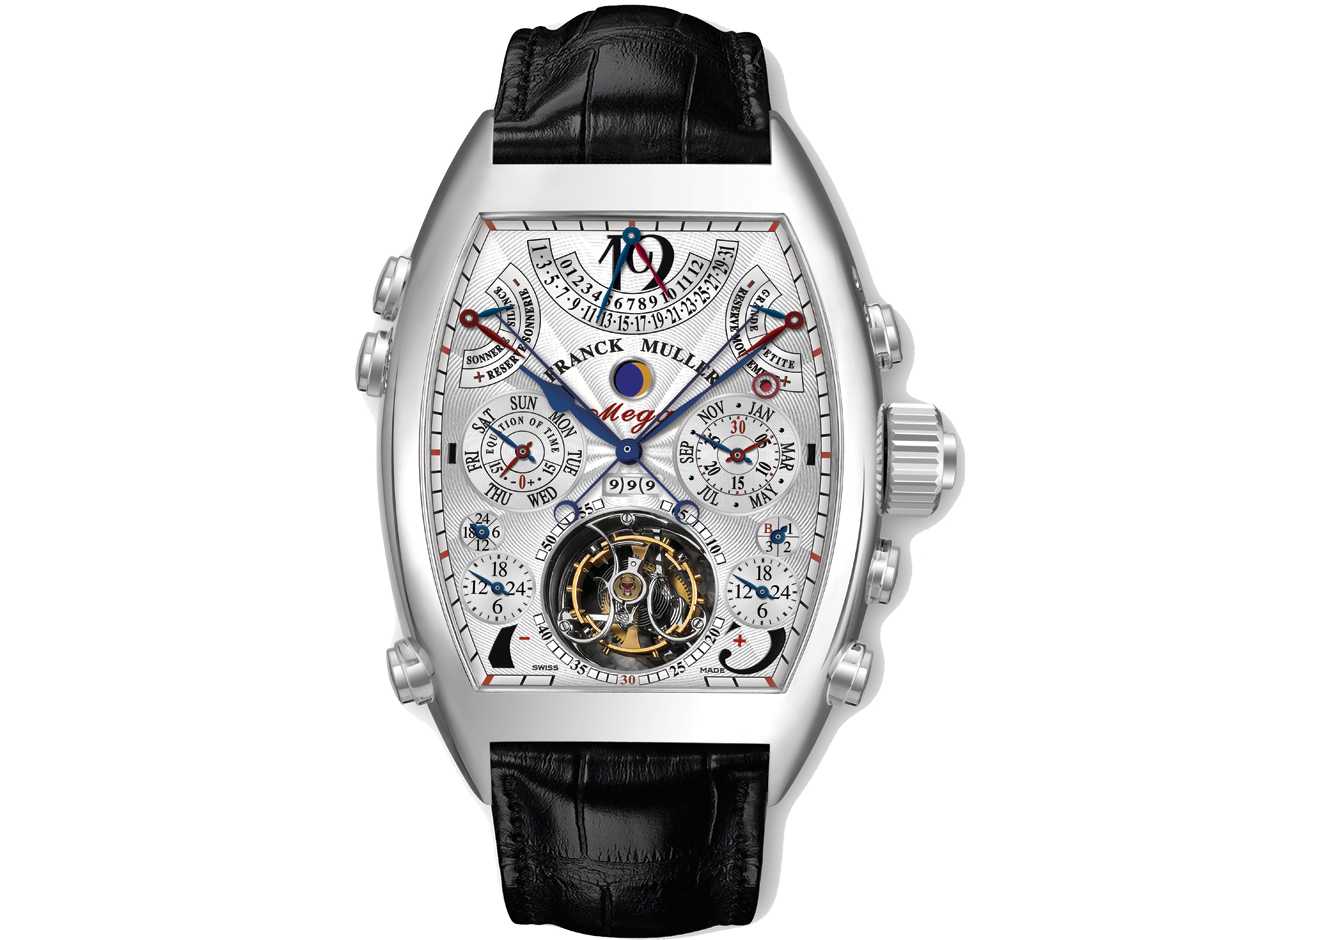 Only watch franck muller only watch